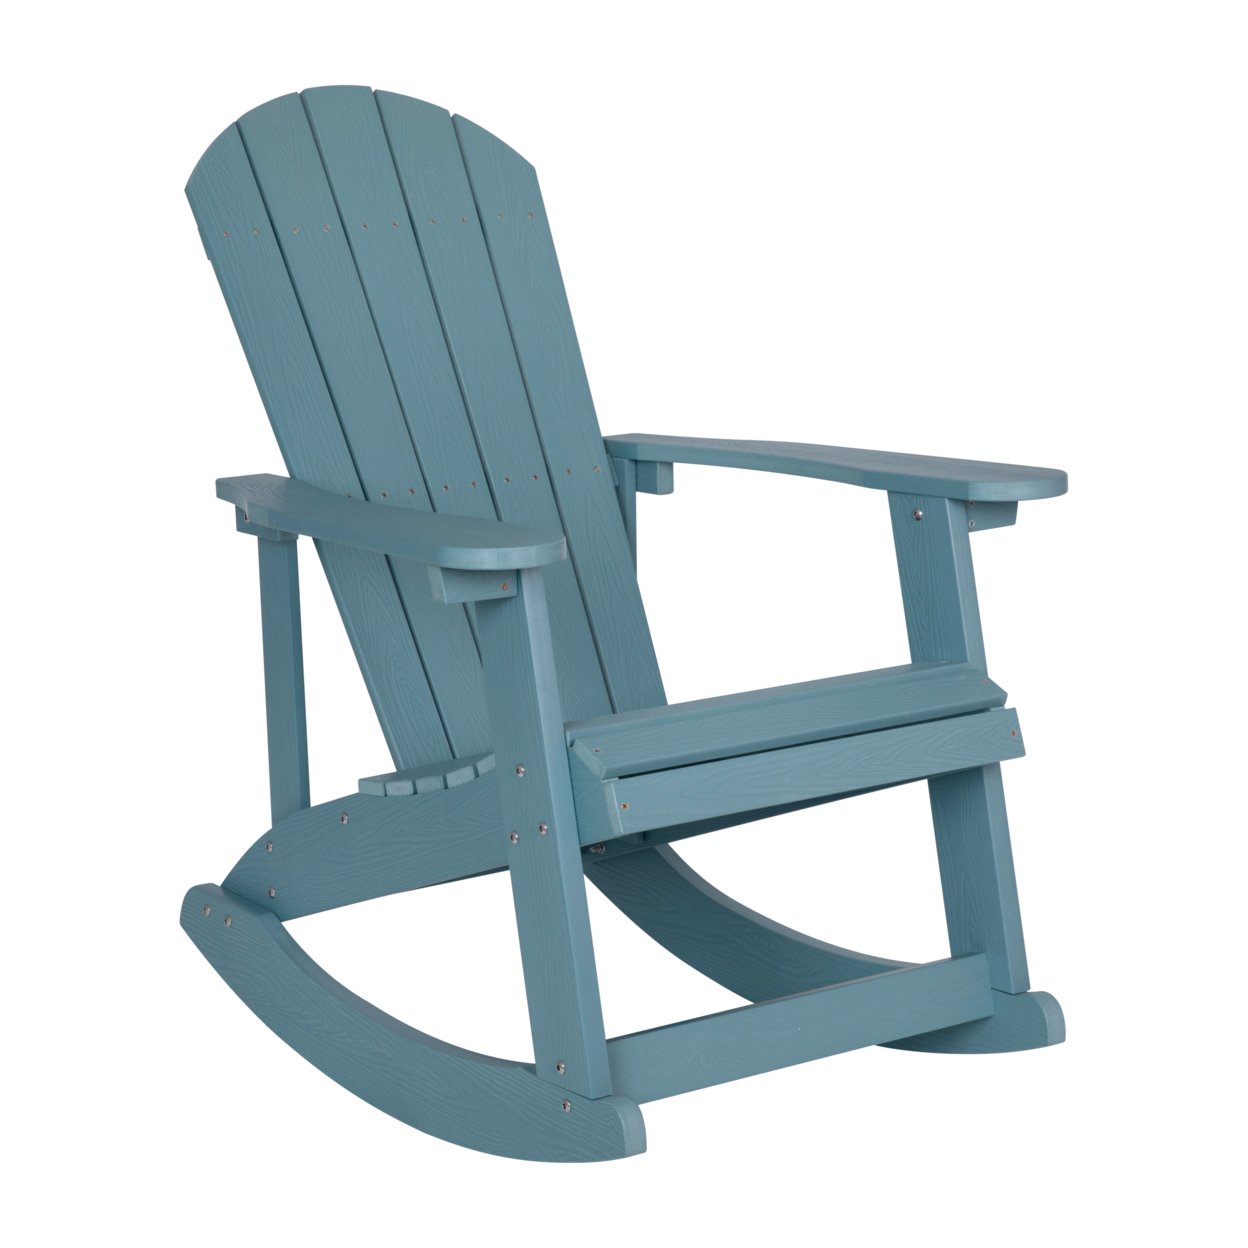 Savannah All-Weather Poly Resin Wood Adirondack Rocking Chair With Rust Resistant Stainless Steel Hardware In Sea Foam